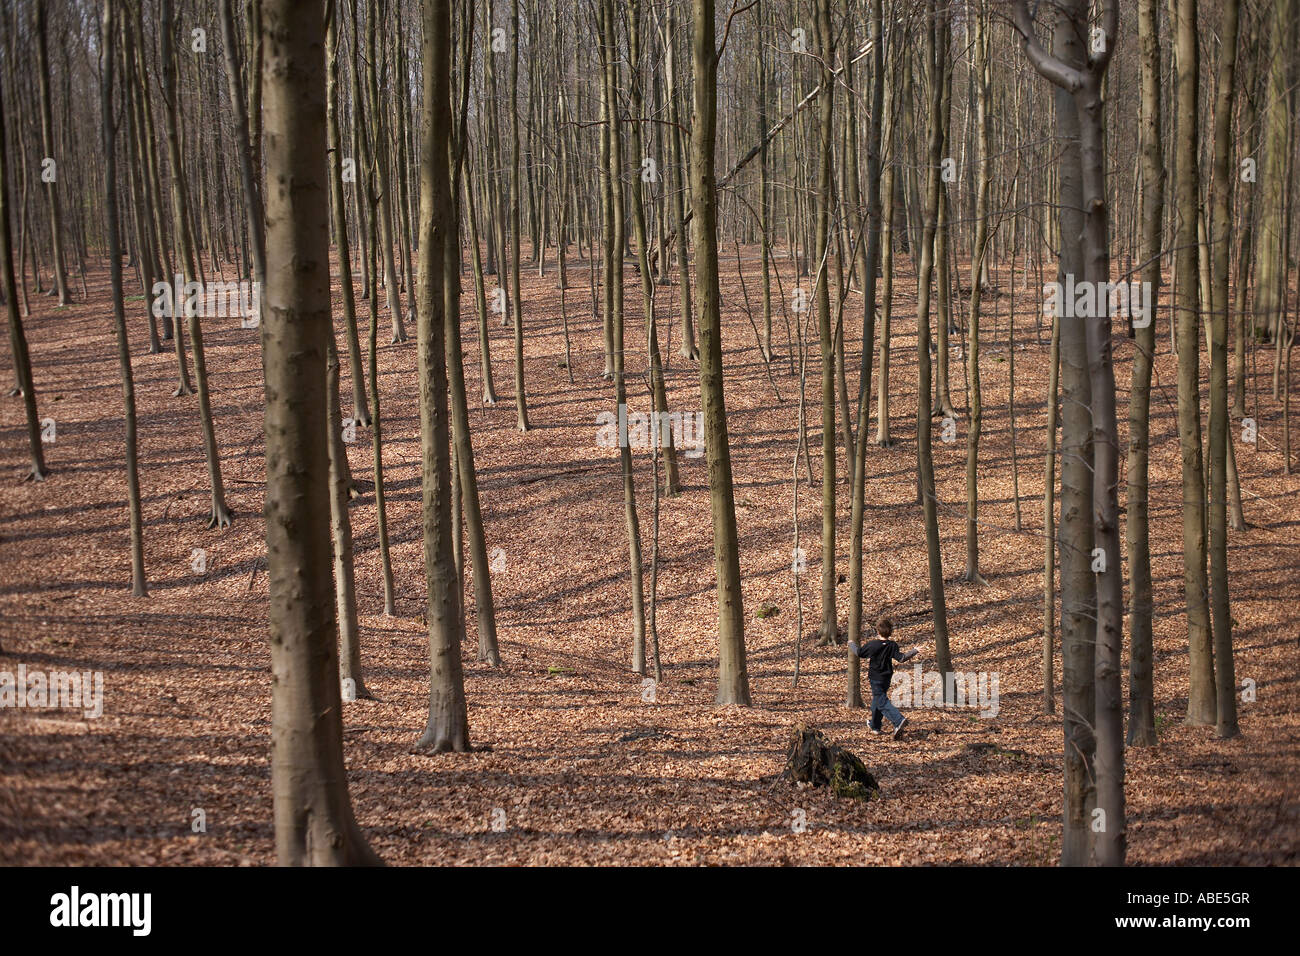 A young 9 year-old boy runs free through the dead leaves in the former royal forest of Tervuren, Brussels, Belgium. Stock Photo